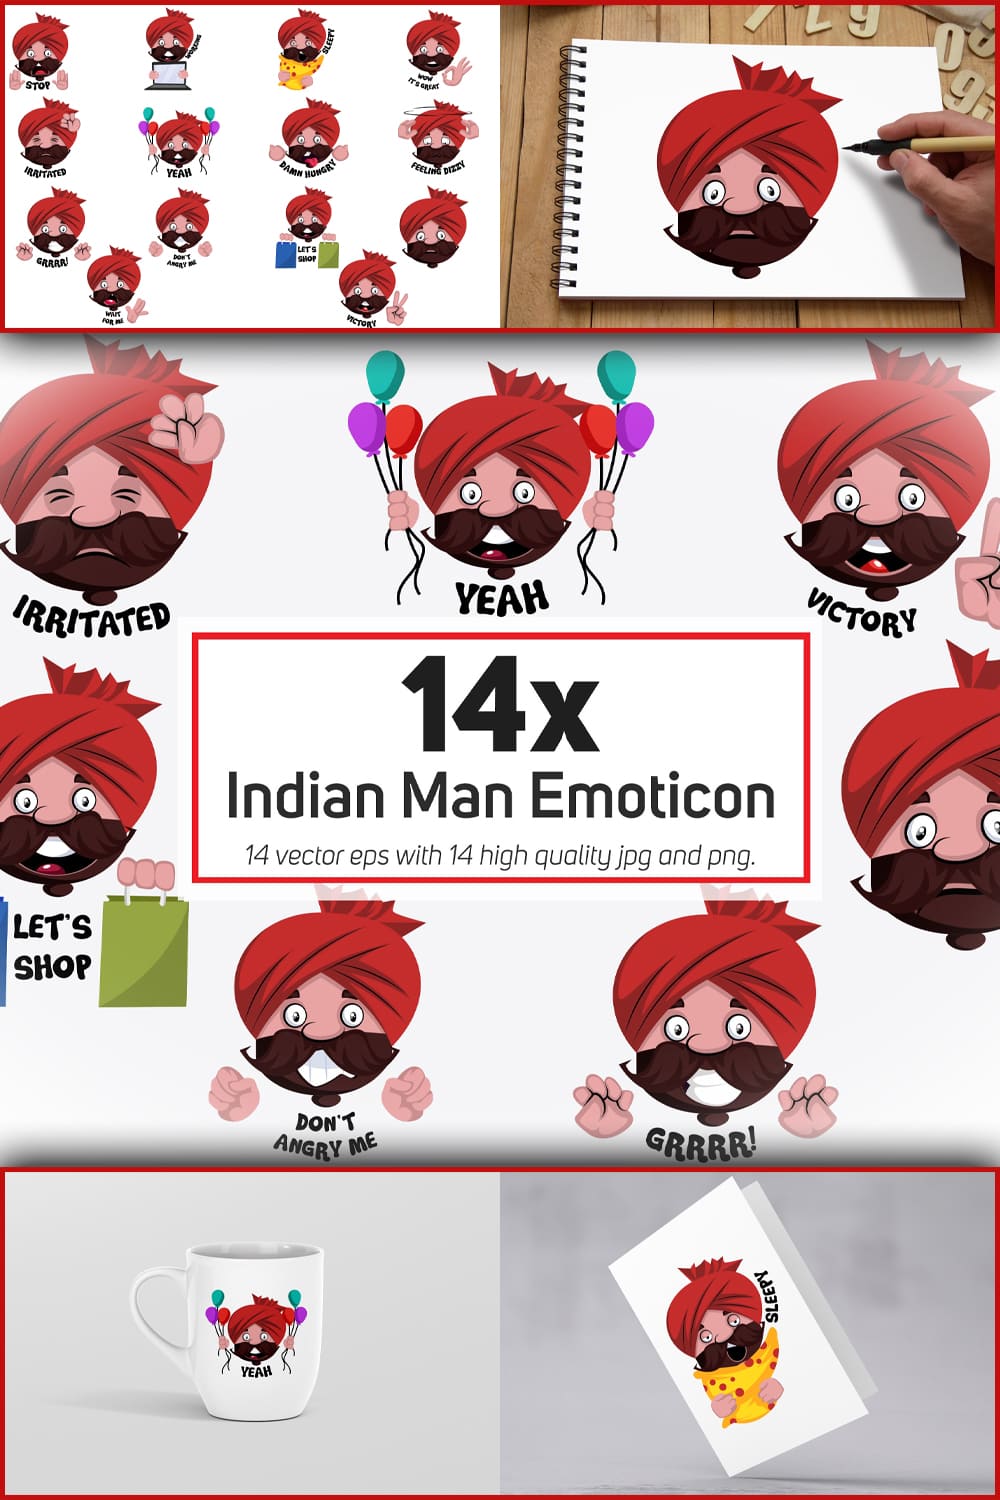 Indian man emoticon or stickers character coll of pinterest.